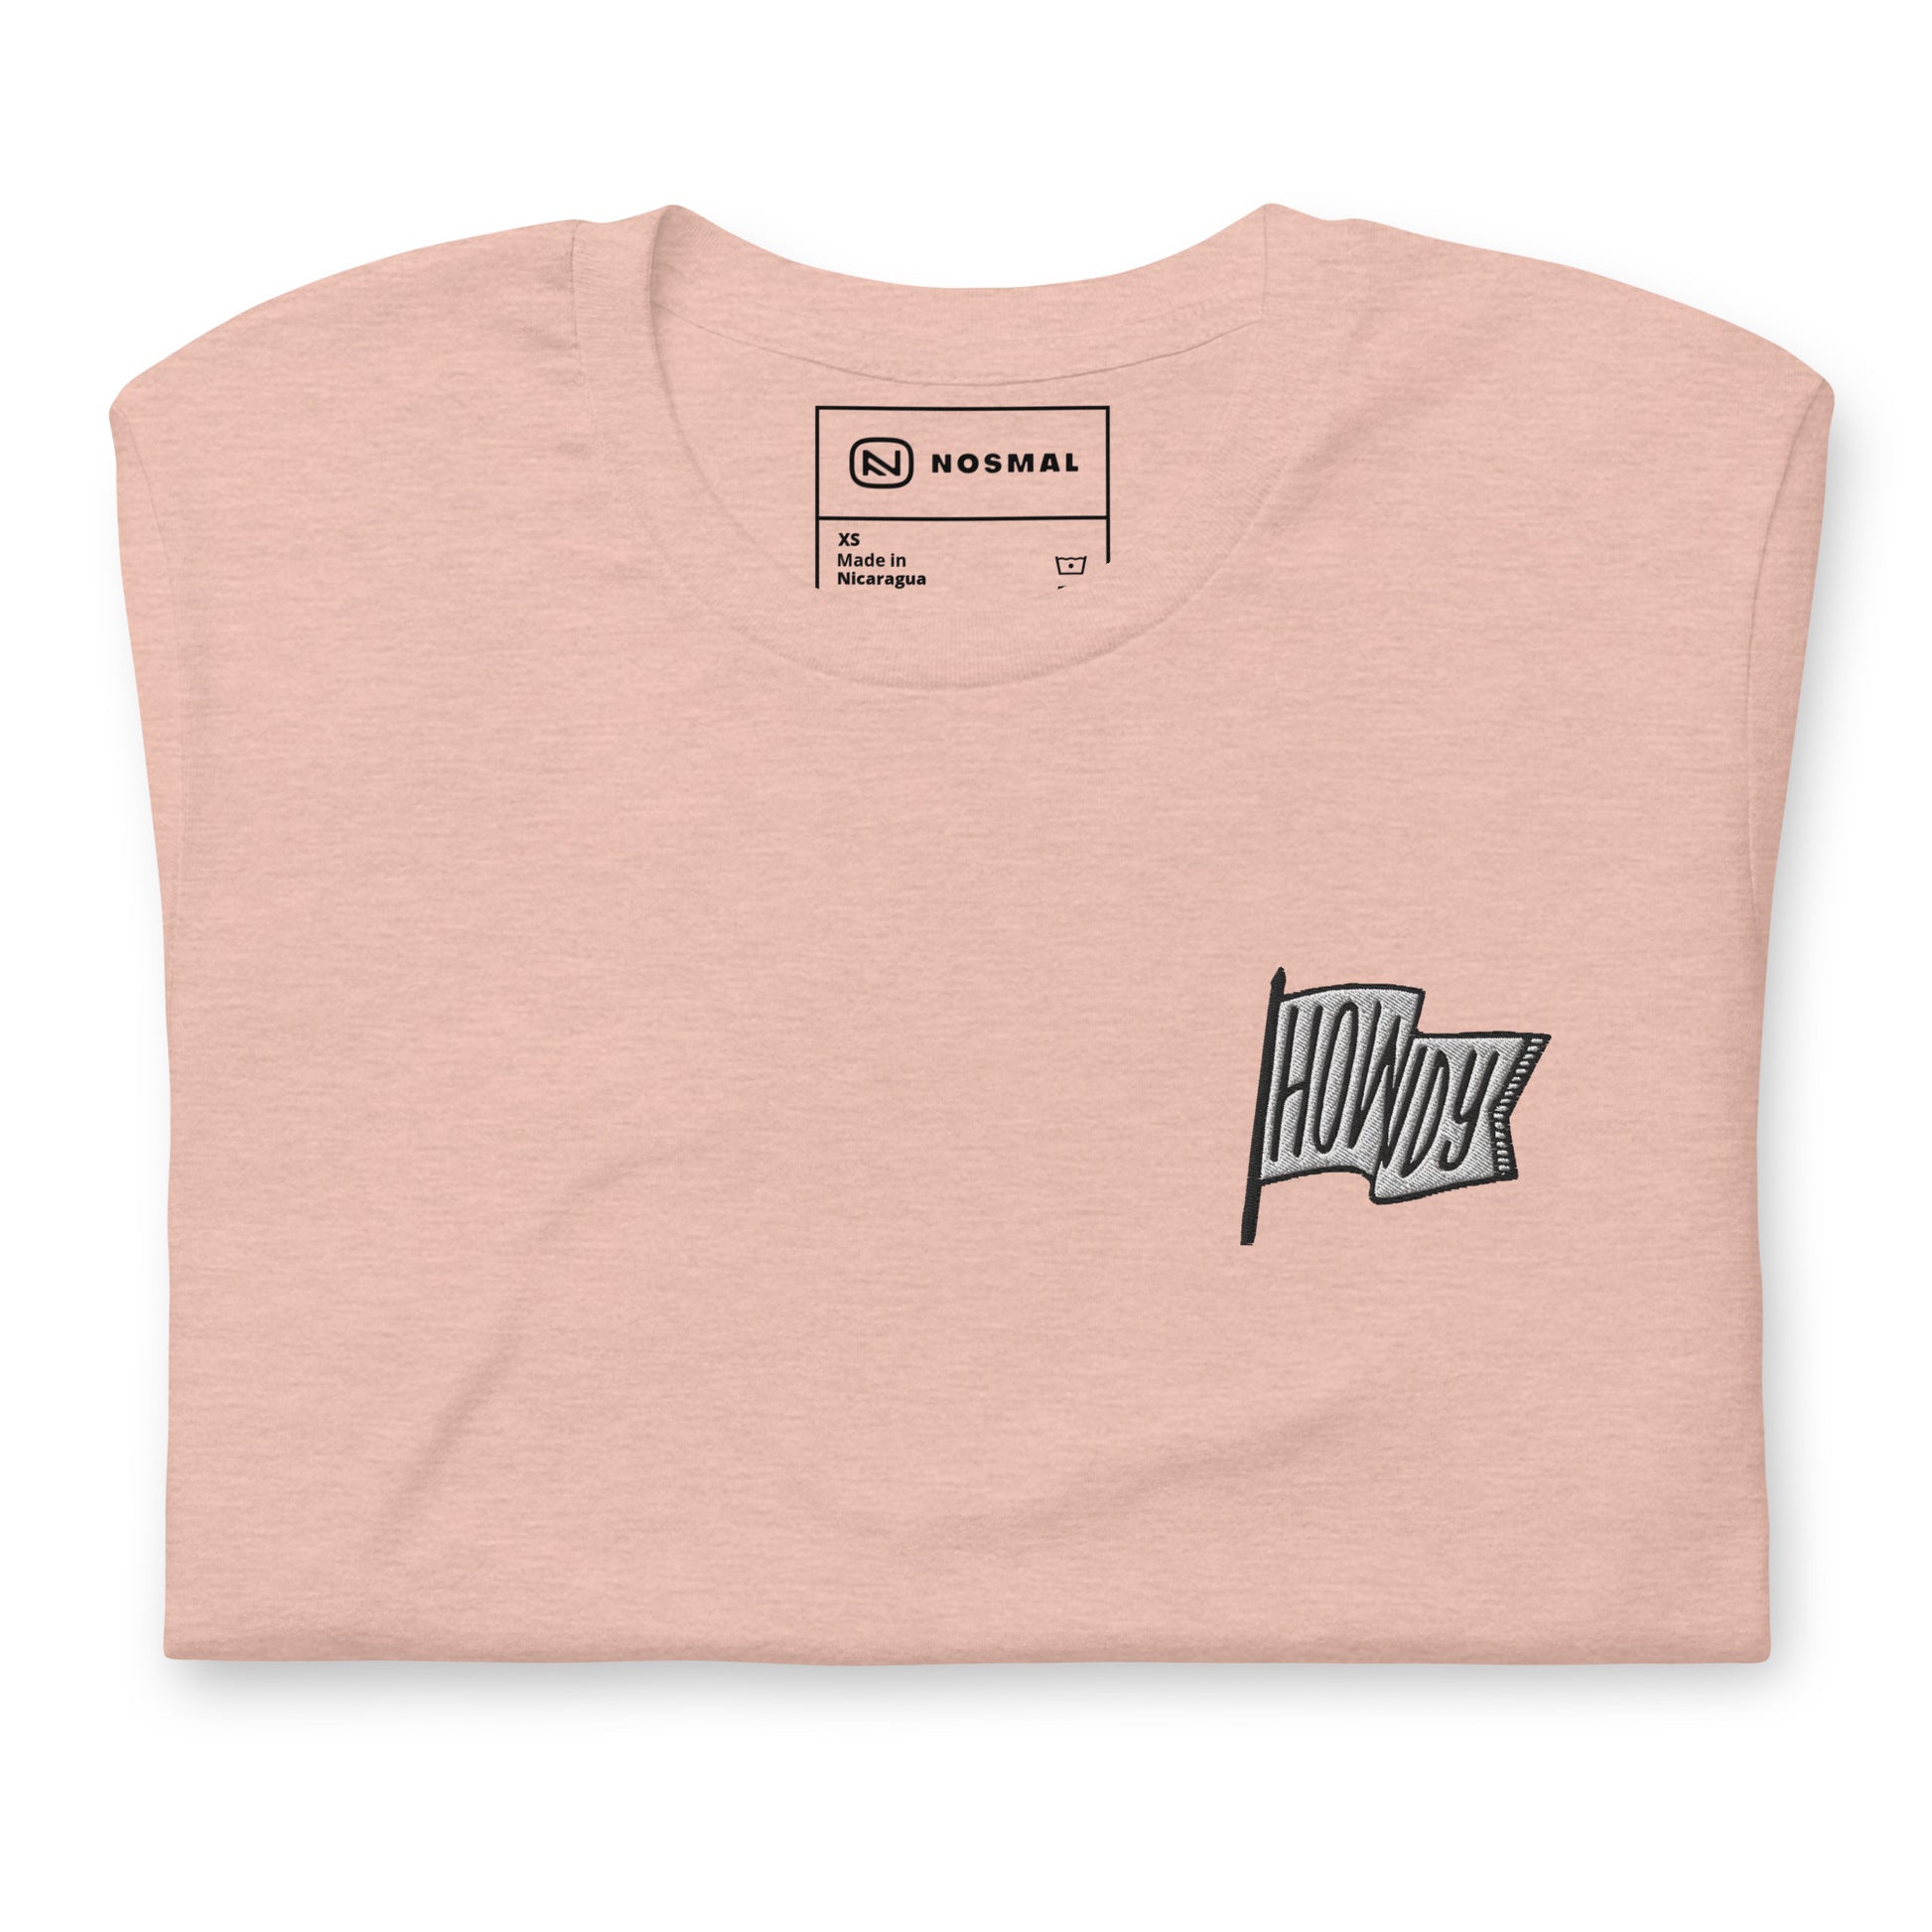 Top down view of howdy embroidered design on heather prism peach unisex t-shirt.